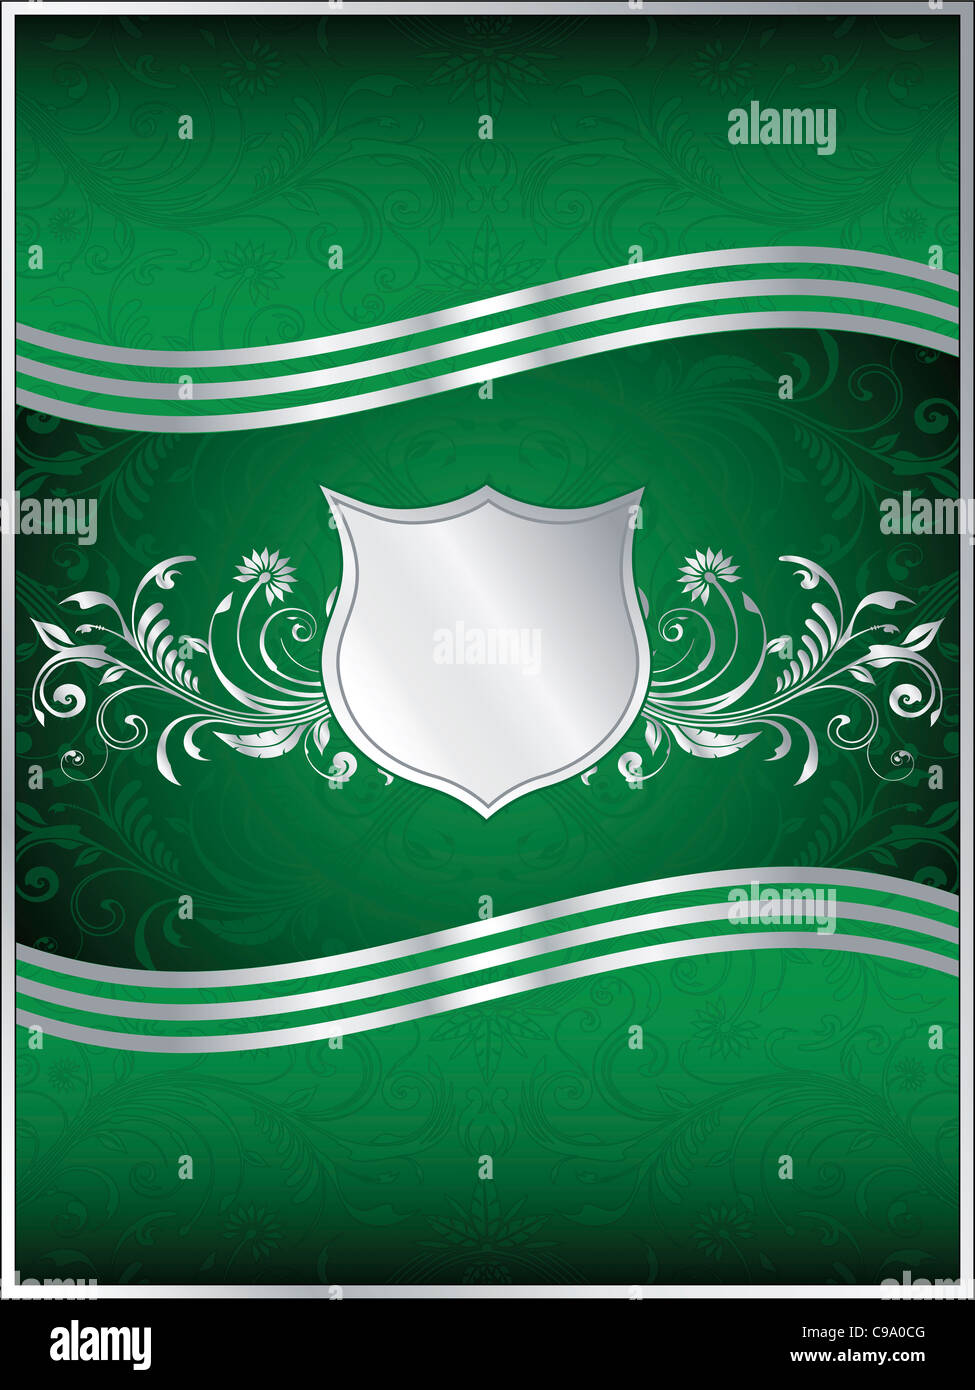 A luxurious emerald green vector background template with ornate silver leaf design flourishes Stock Photo